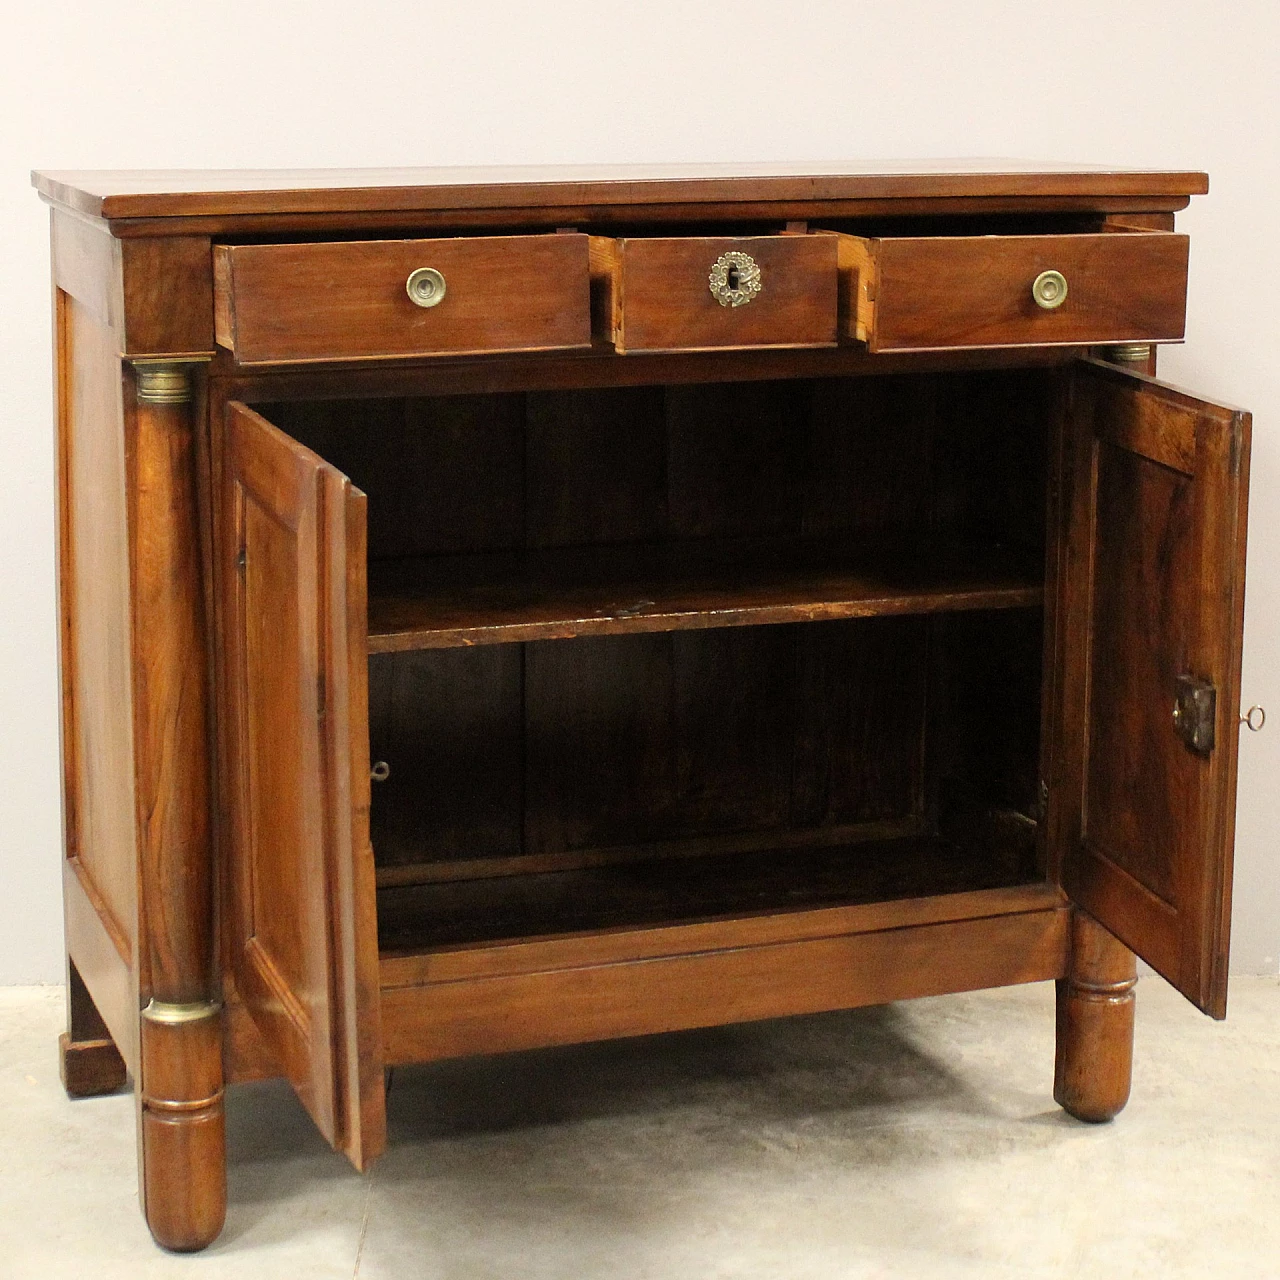 Empire walnut sideboard with doors and drawers, early 19th century 8